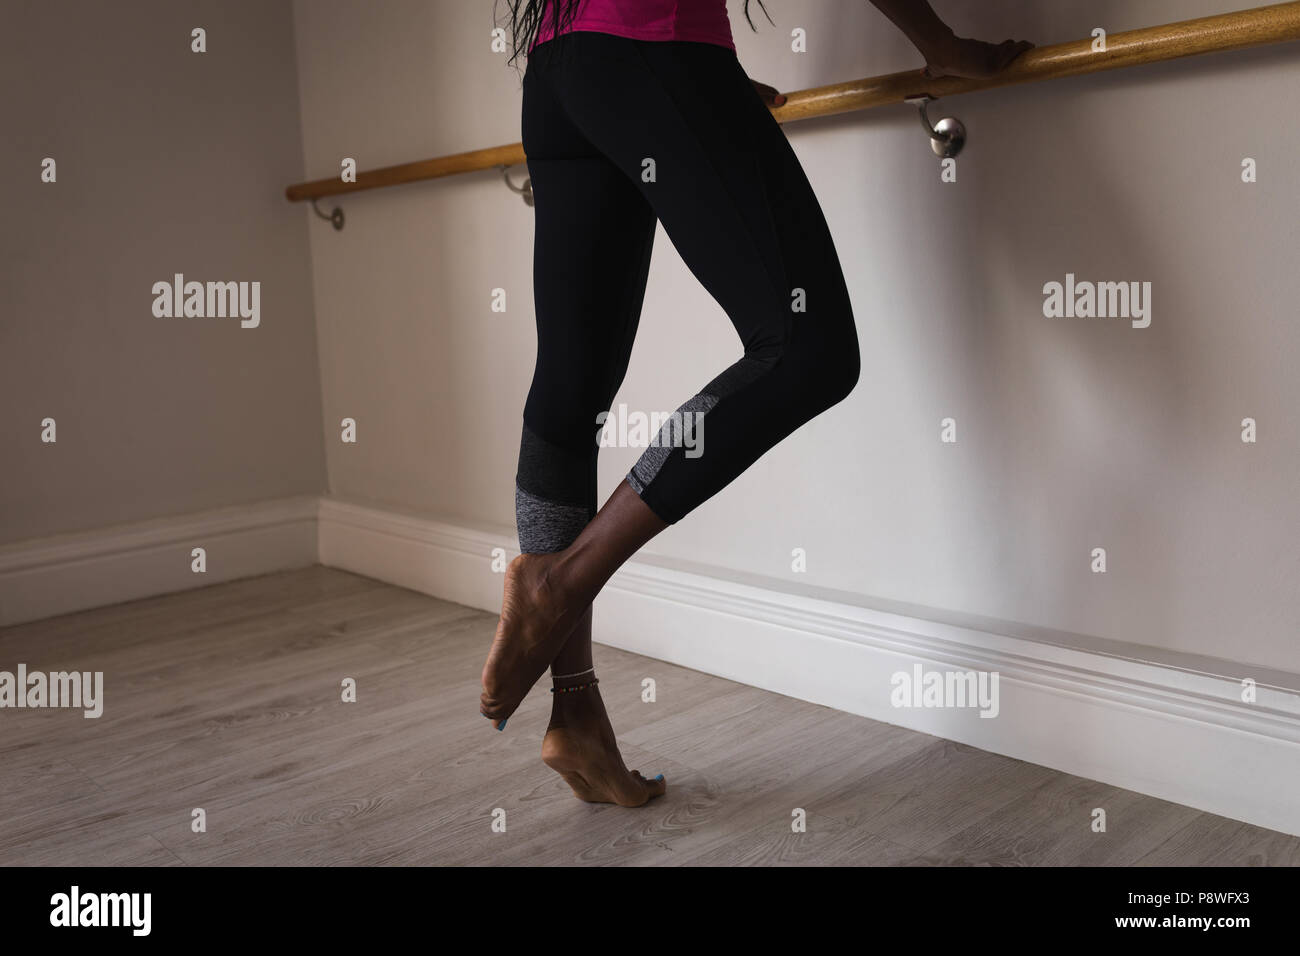 Woman performing barre exercise Stock Photo